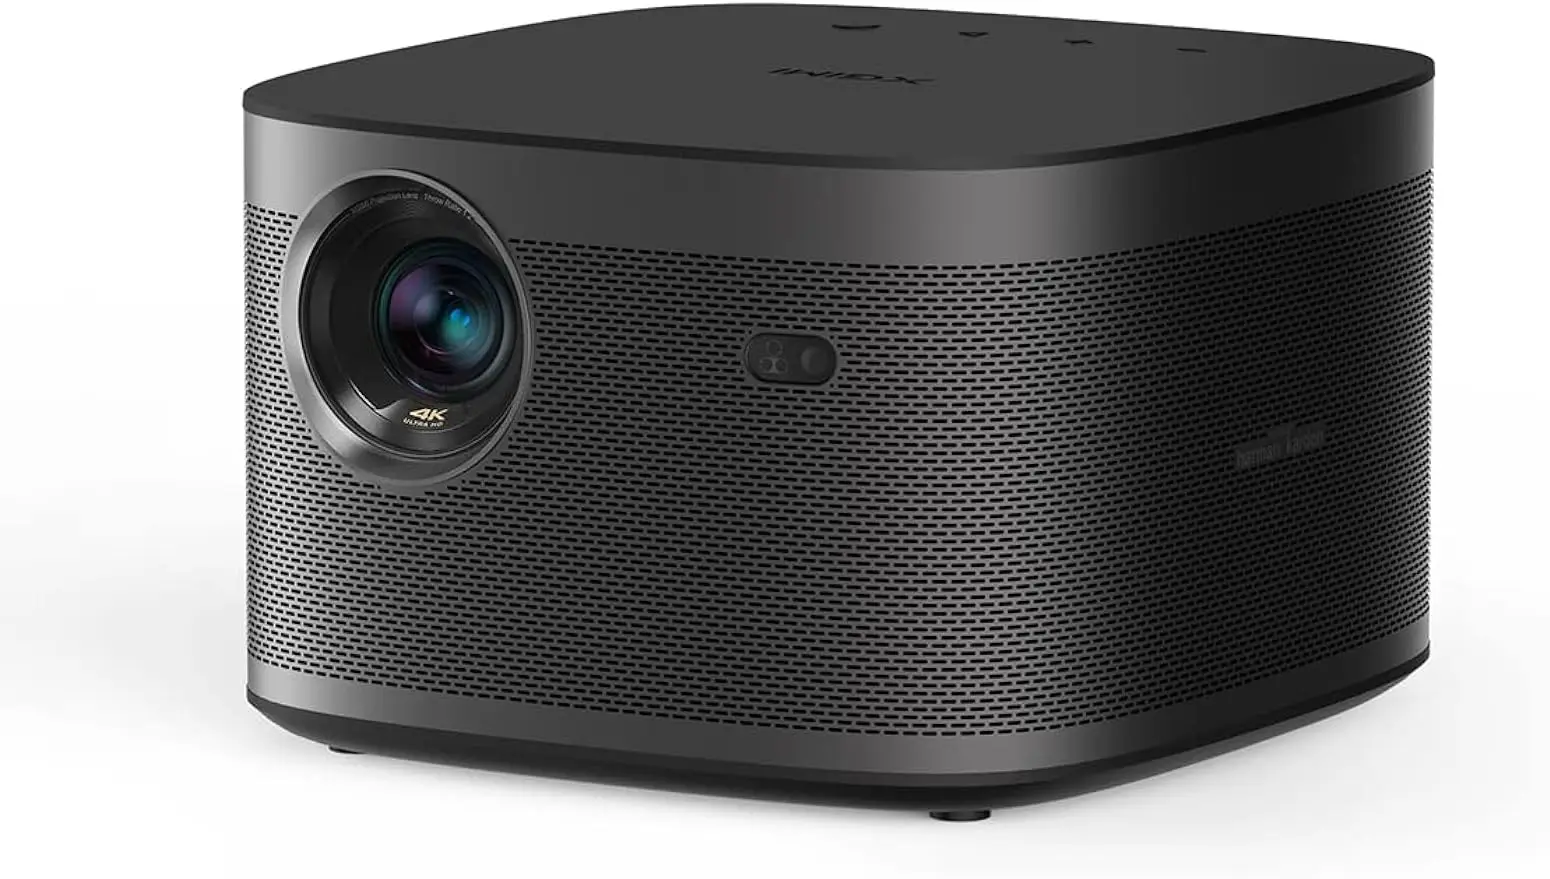 

XGIMI Horizon Pro 4K Projector, 1500 ISO Lumens, Android TV 10.0 Movie Projector with Integrated Harman Kardon Speakers